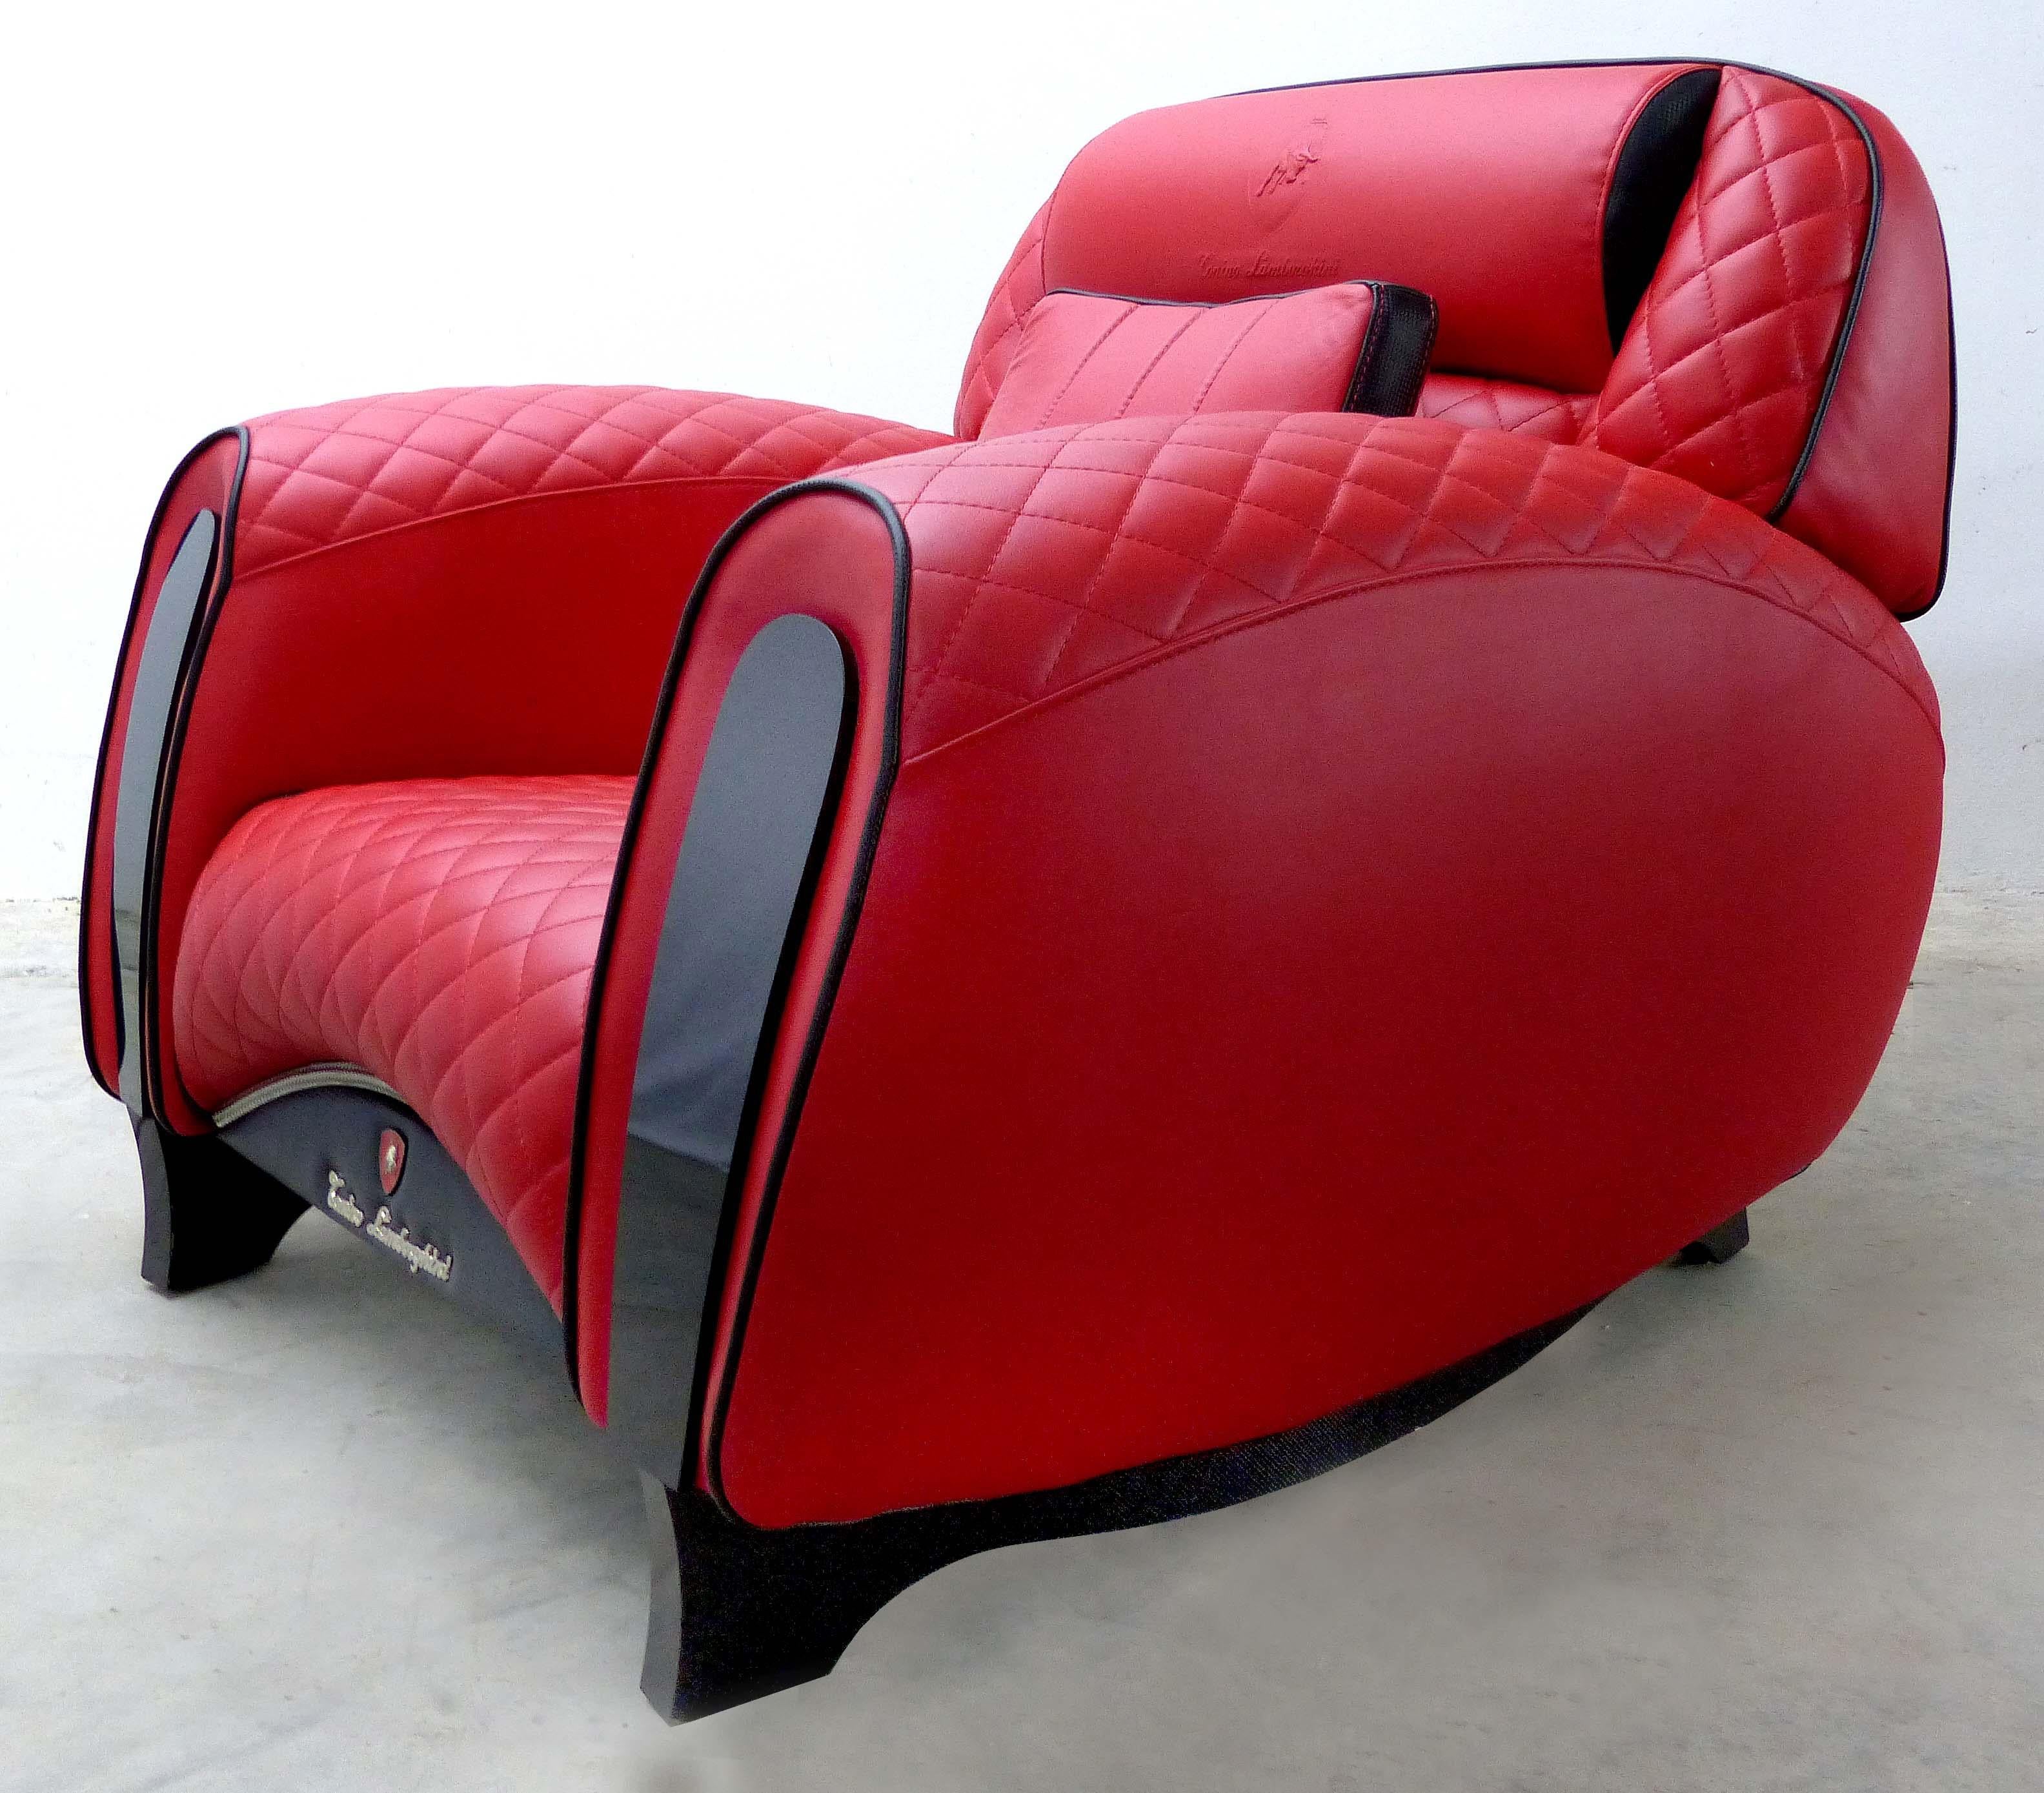 Offered for sale are two carbon Imola armchairs from Italian manufacturer Formitalia for Tonino Lamborghini. Made of leather, carbon, steel, and polyurethane, this incredibly comfortable pair of club chairs have the highest quality supple leather,